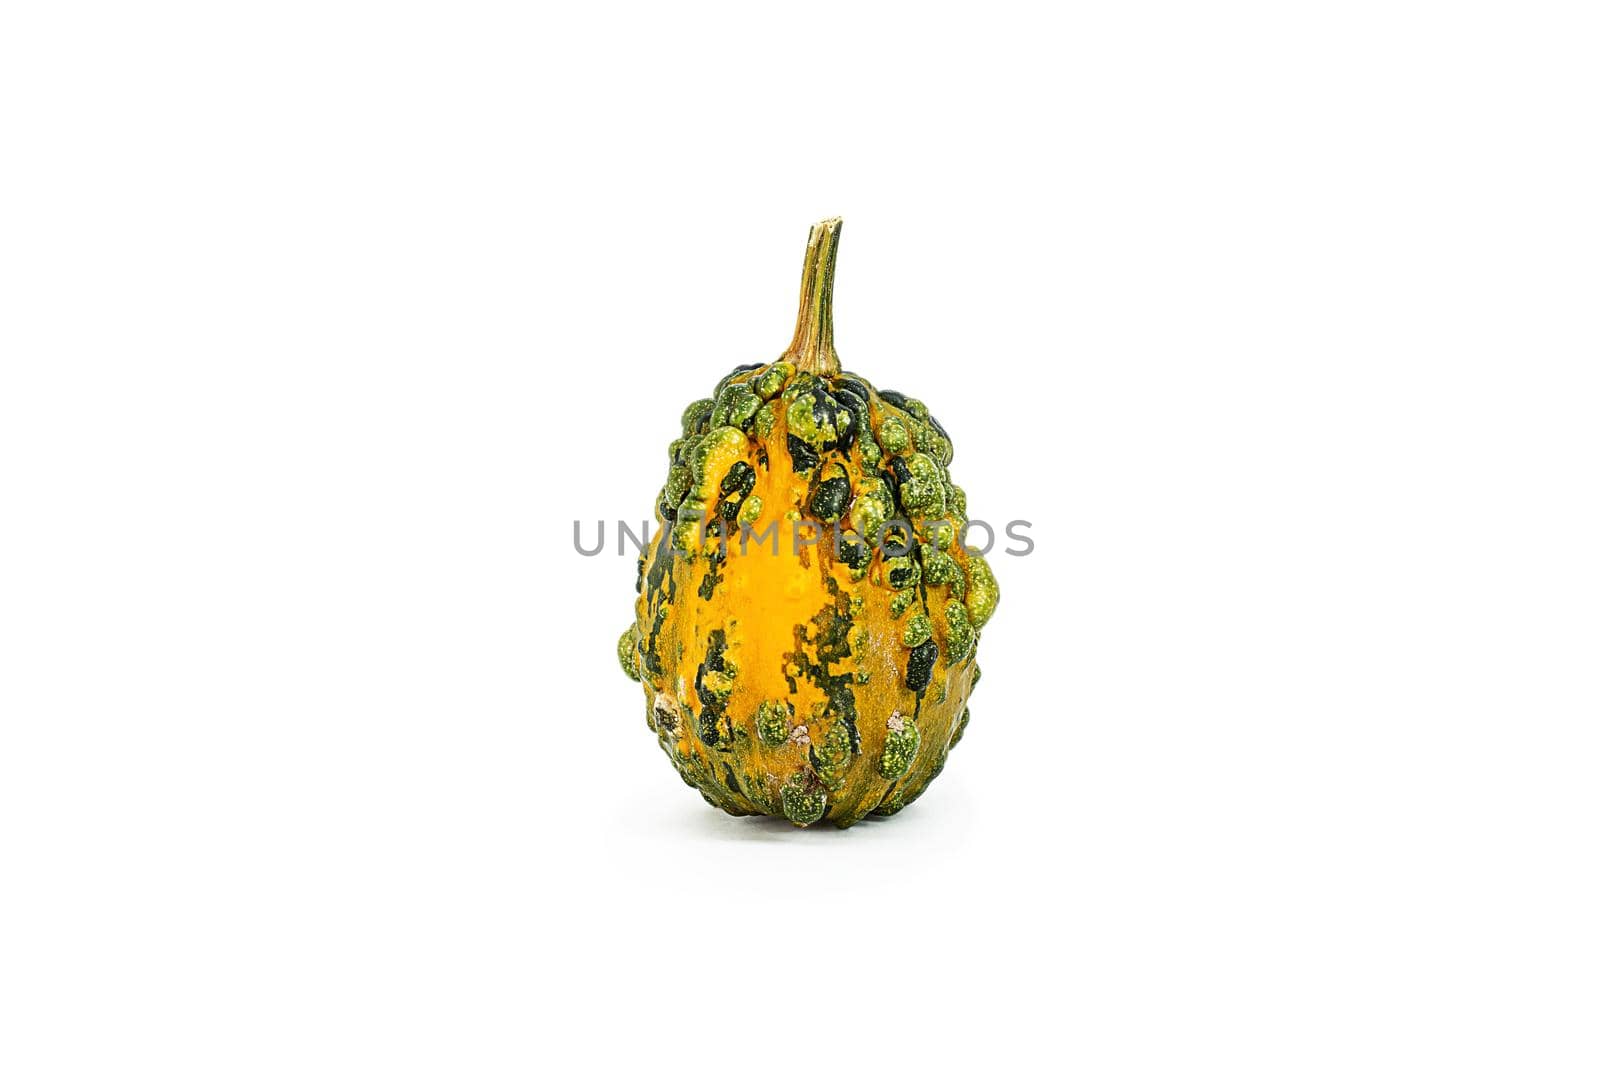 colorful decorative pumpkin on white background, isolated, cut out object by Ramanouskaya